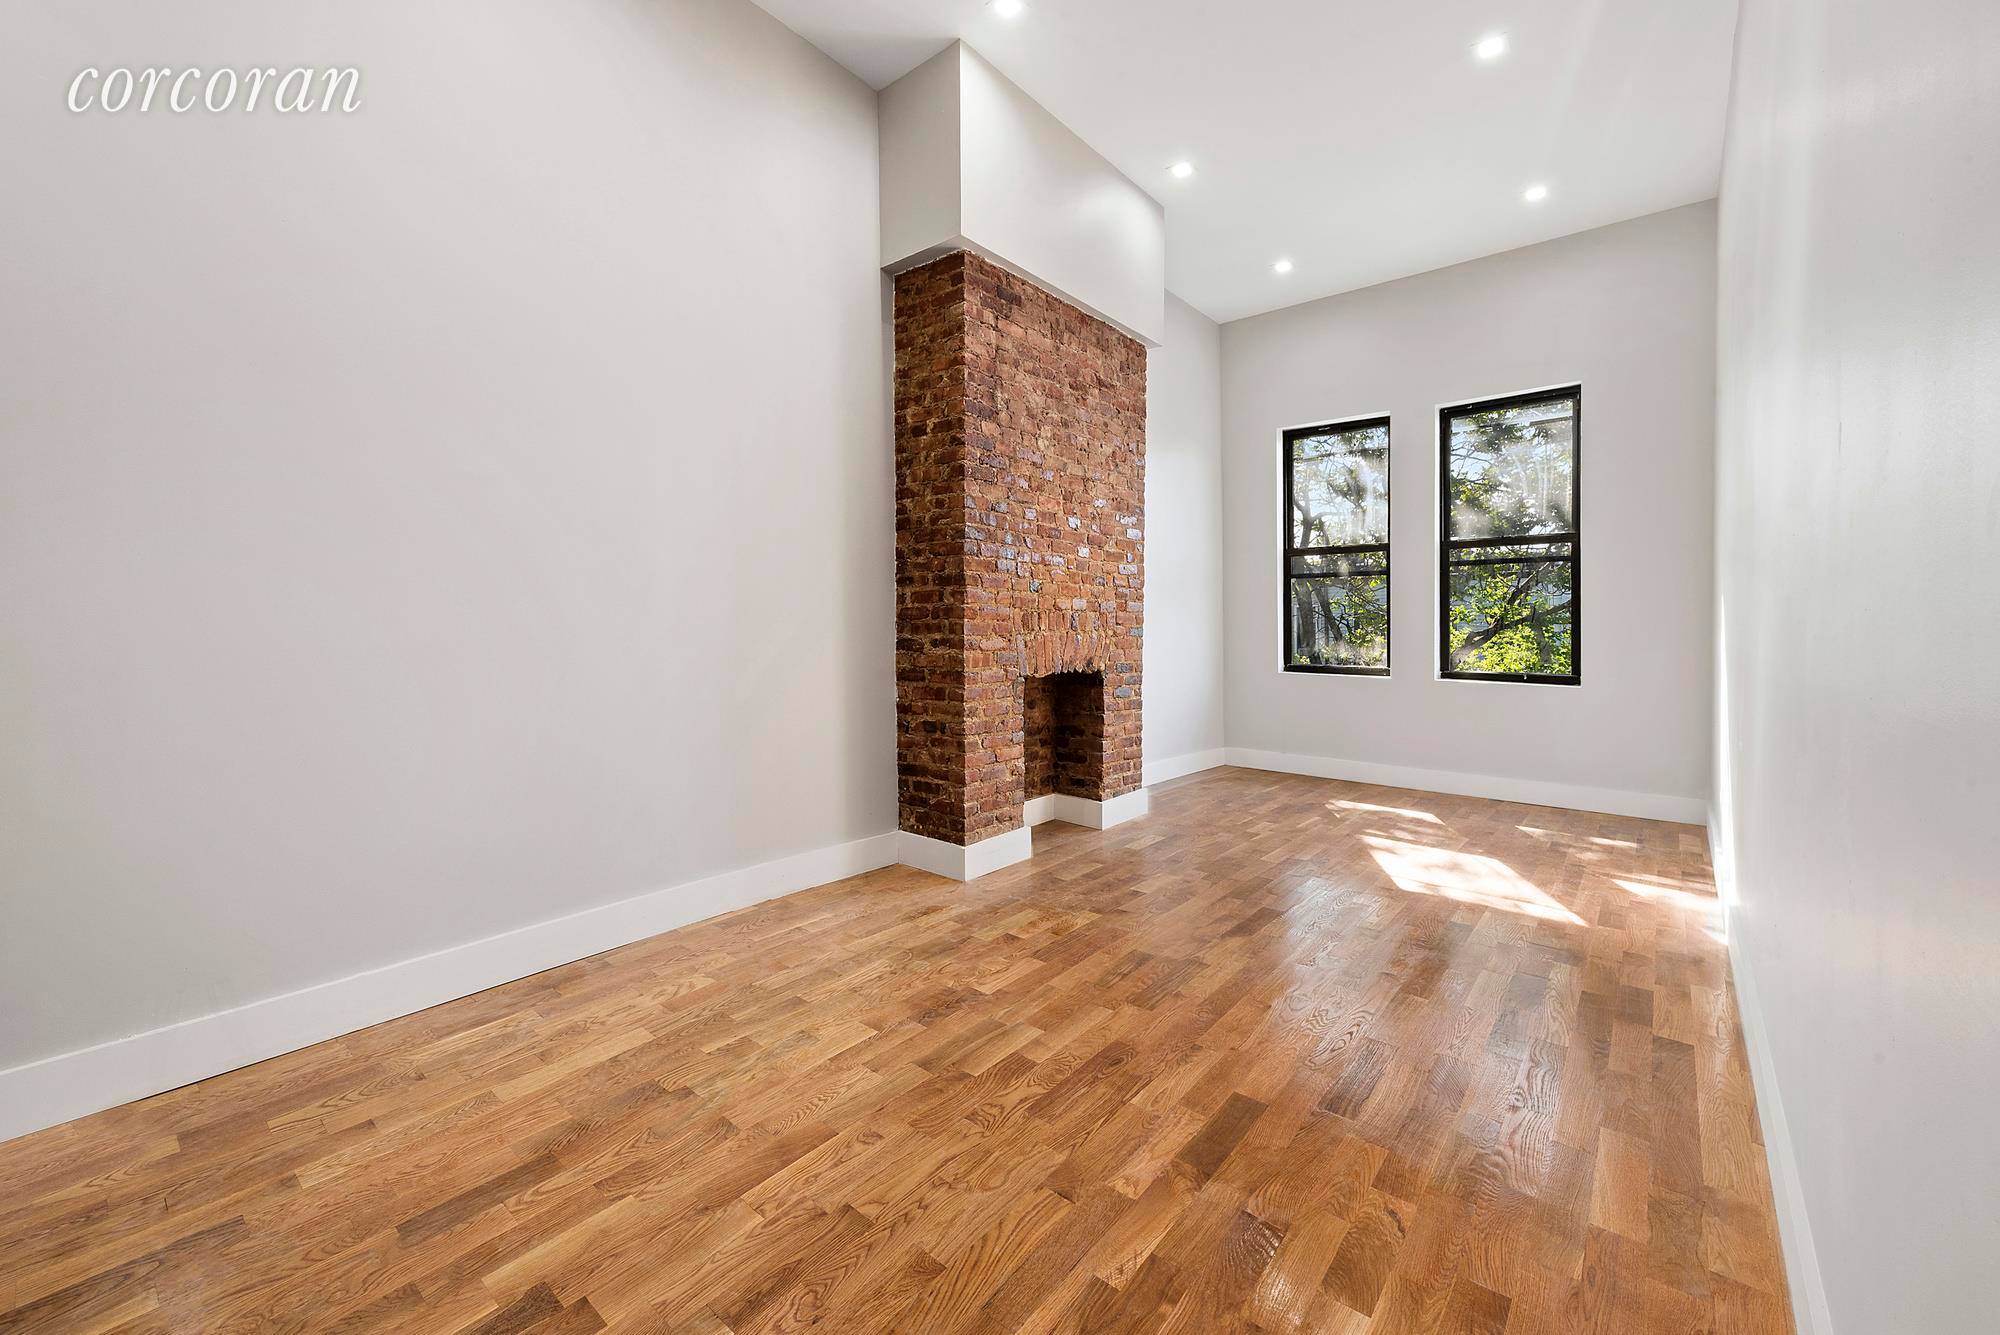 Be the first to own this completely gut renovated three family townhouse located at 1102 Putnam Ave.